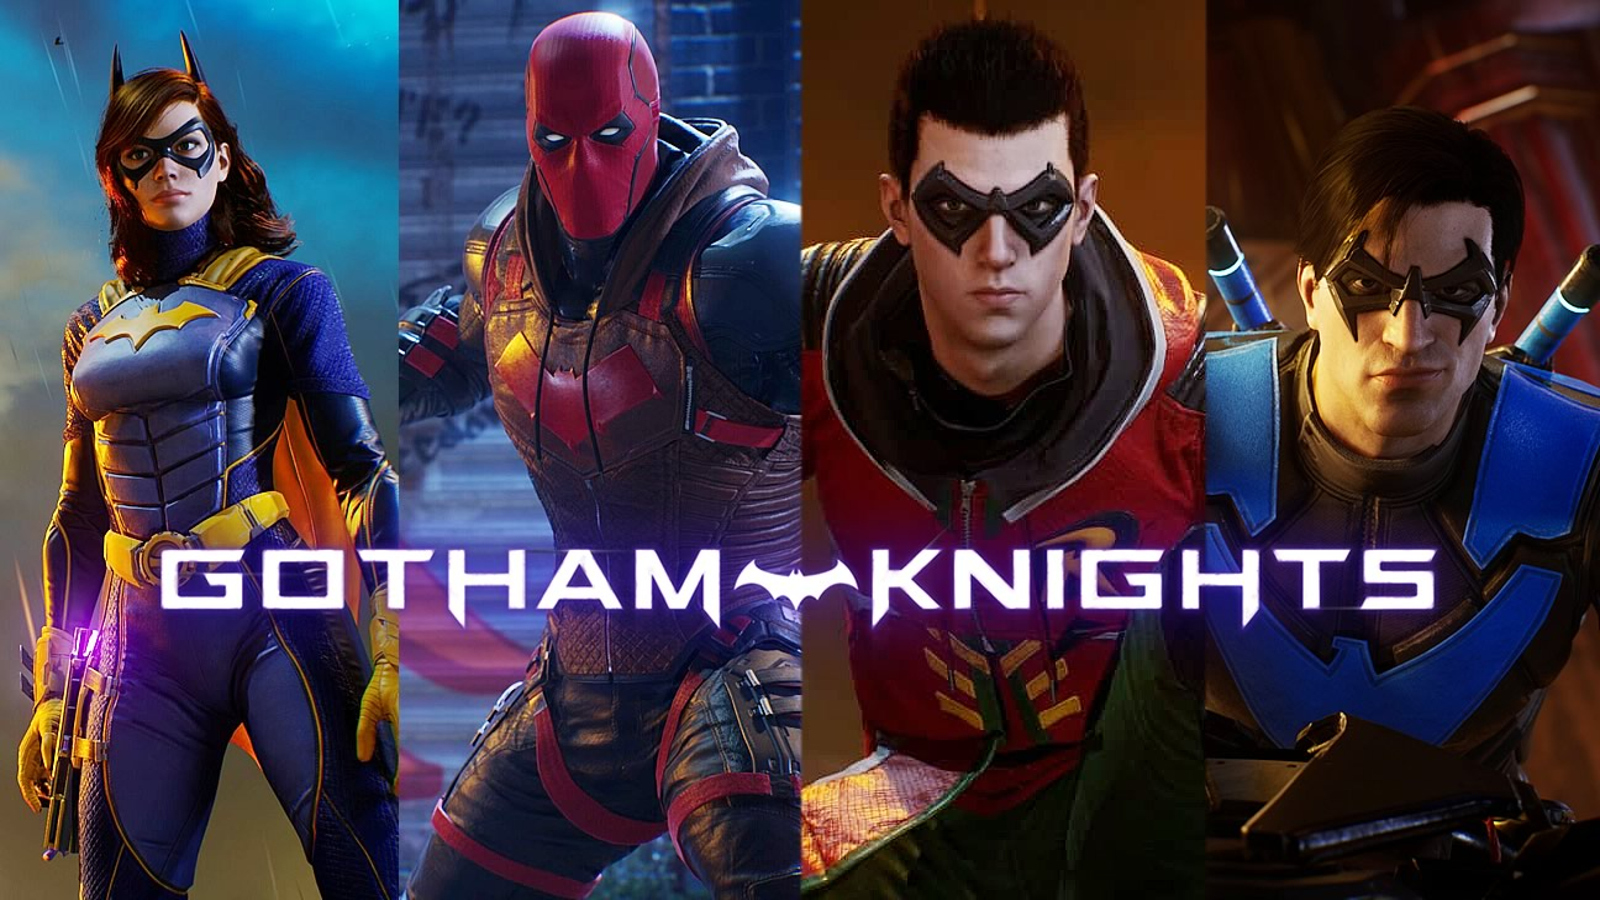 Gotham Knights Canceled on PS4, Xbox One, Gets New Gameplay Video